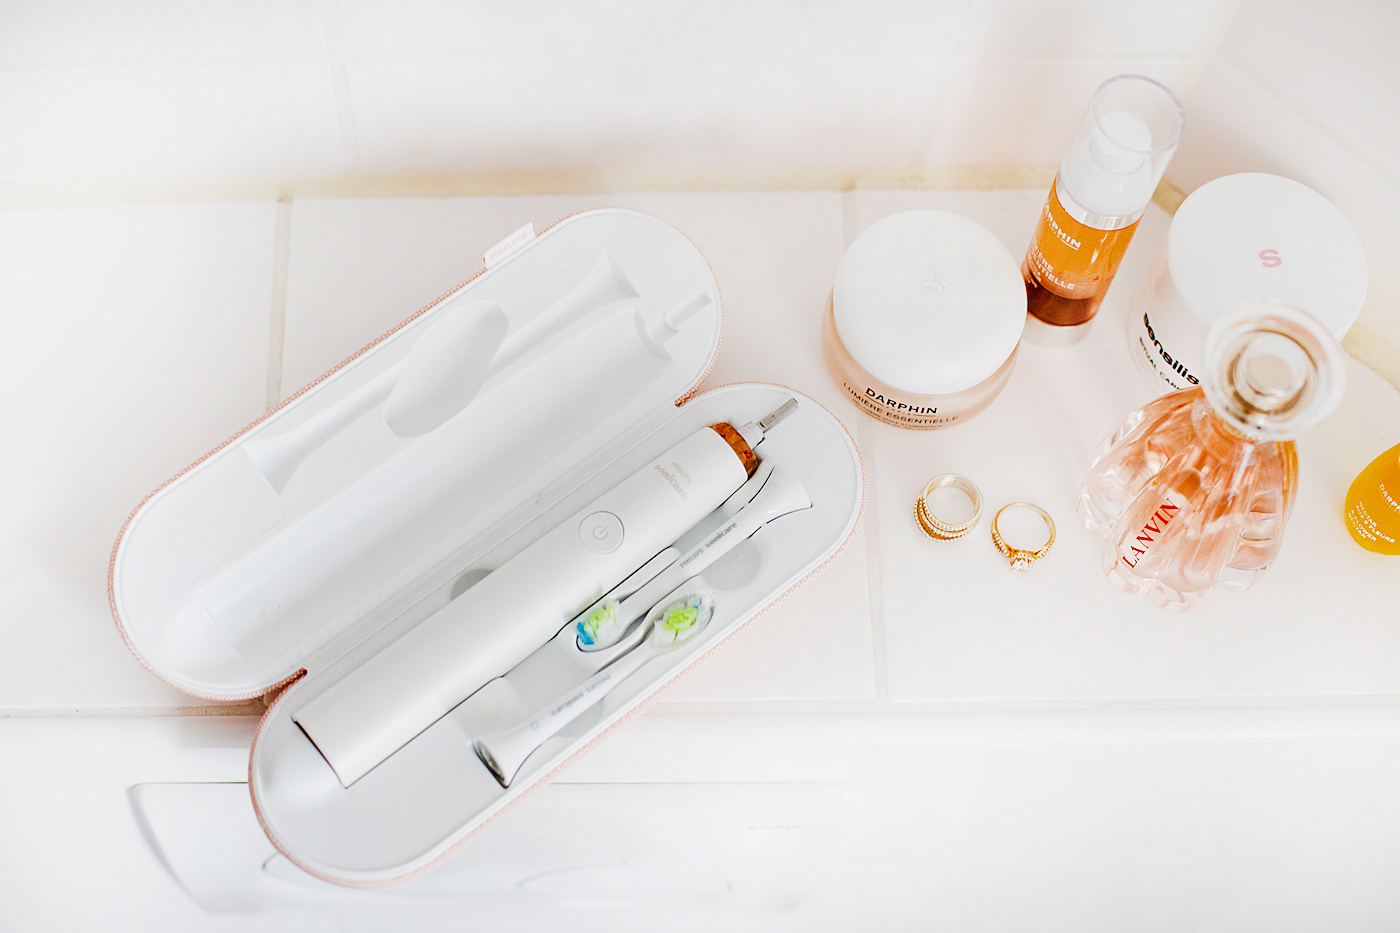  philips sonicare rosegold | zahnspange als erwachsener update Zahnspange als Erwachsener Erfahrungsbericht, braces for adults experience